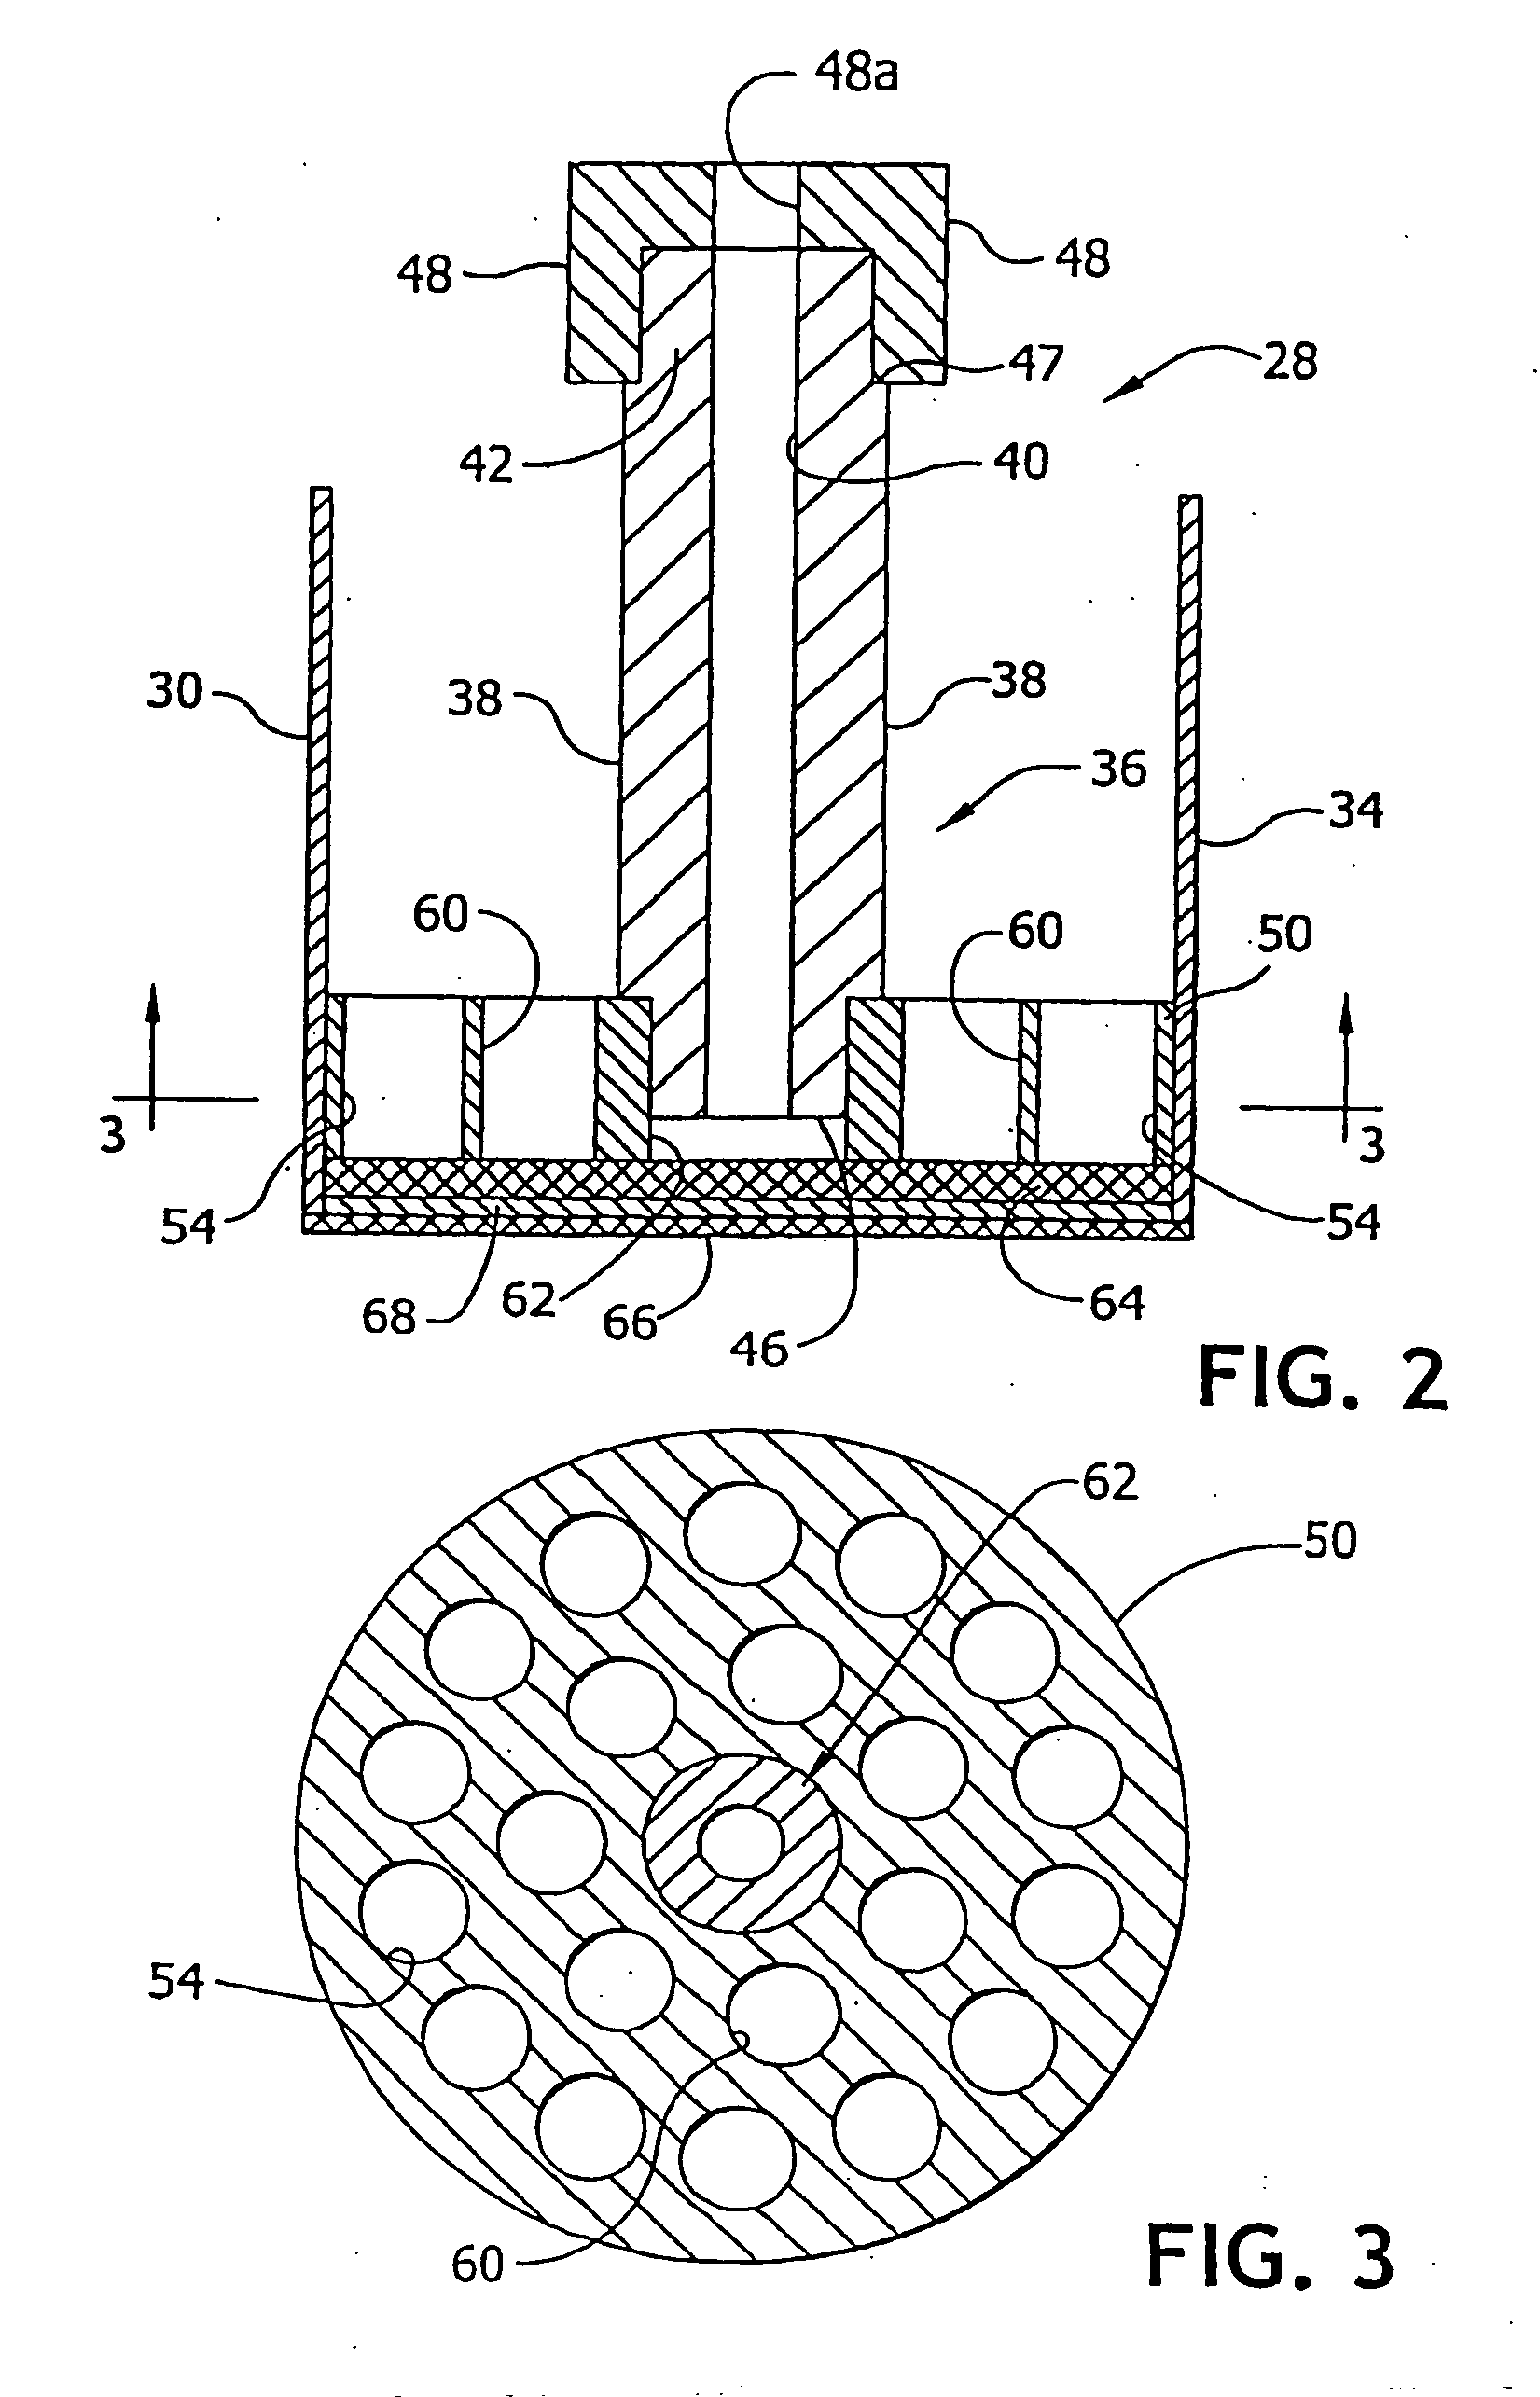 Method of manufacturing and method of marketing gender-specific absorbent articles having liquid-handling properties tailored to each gender